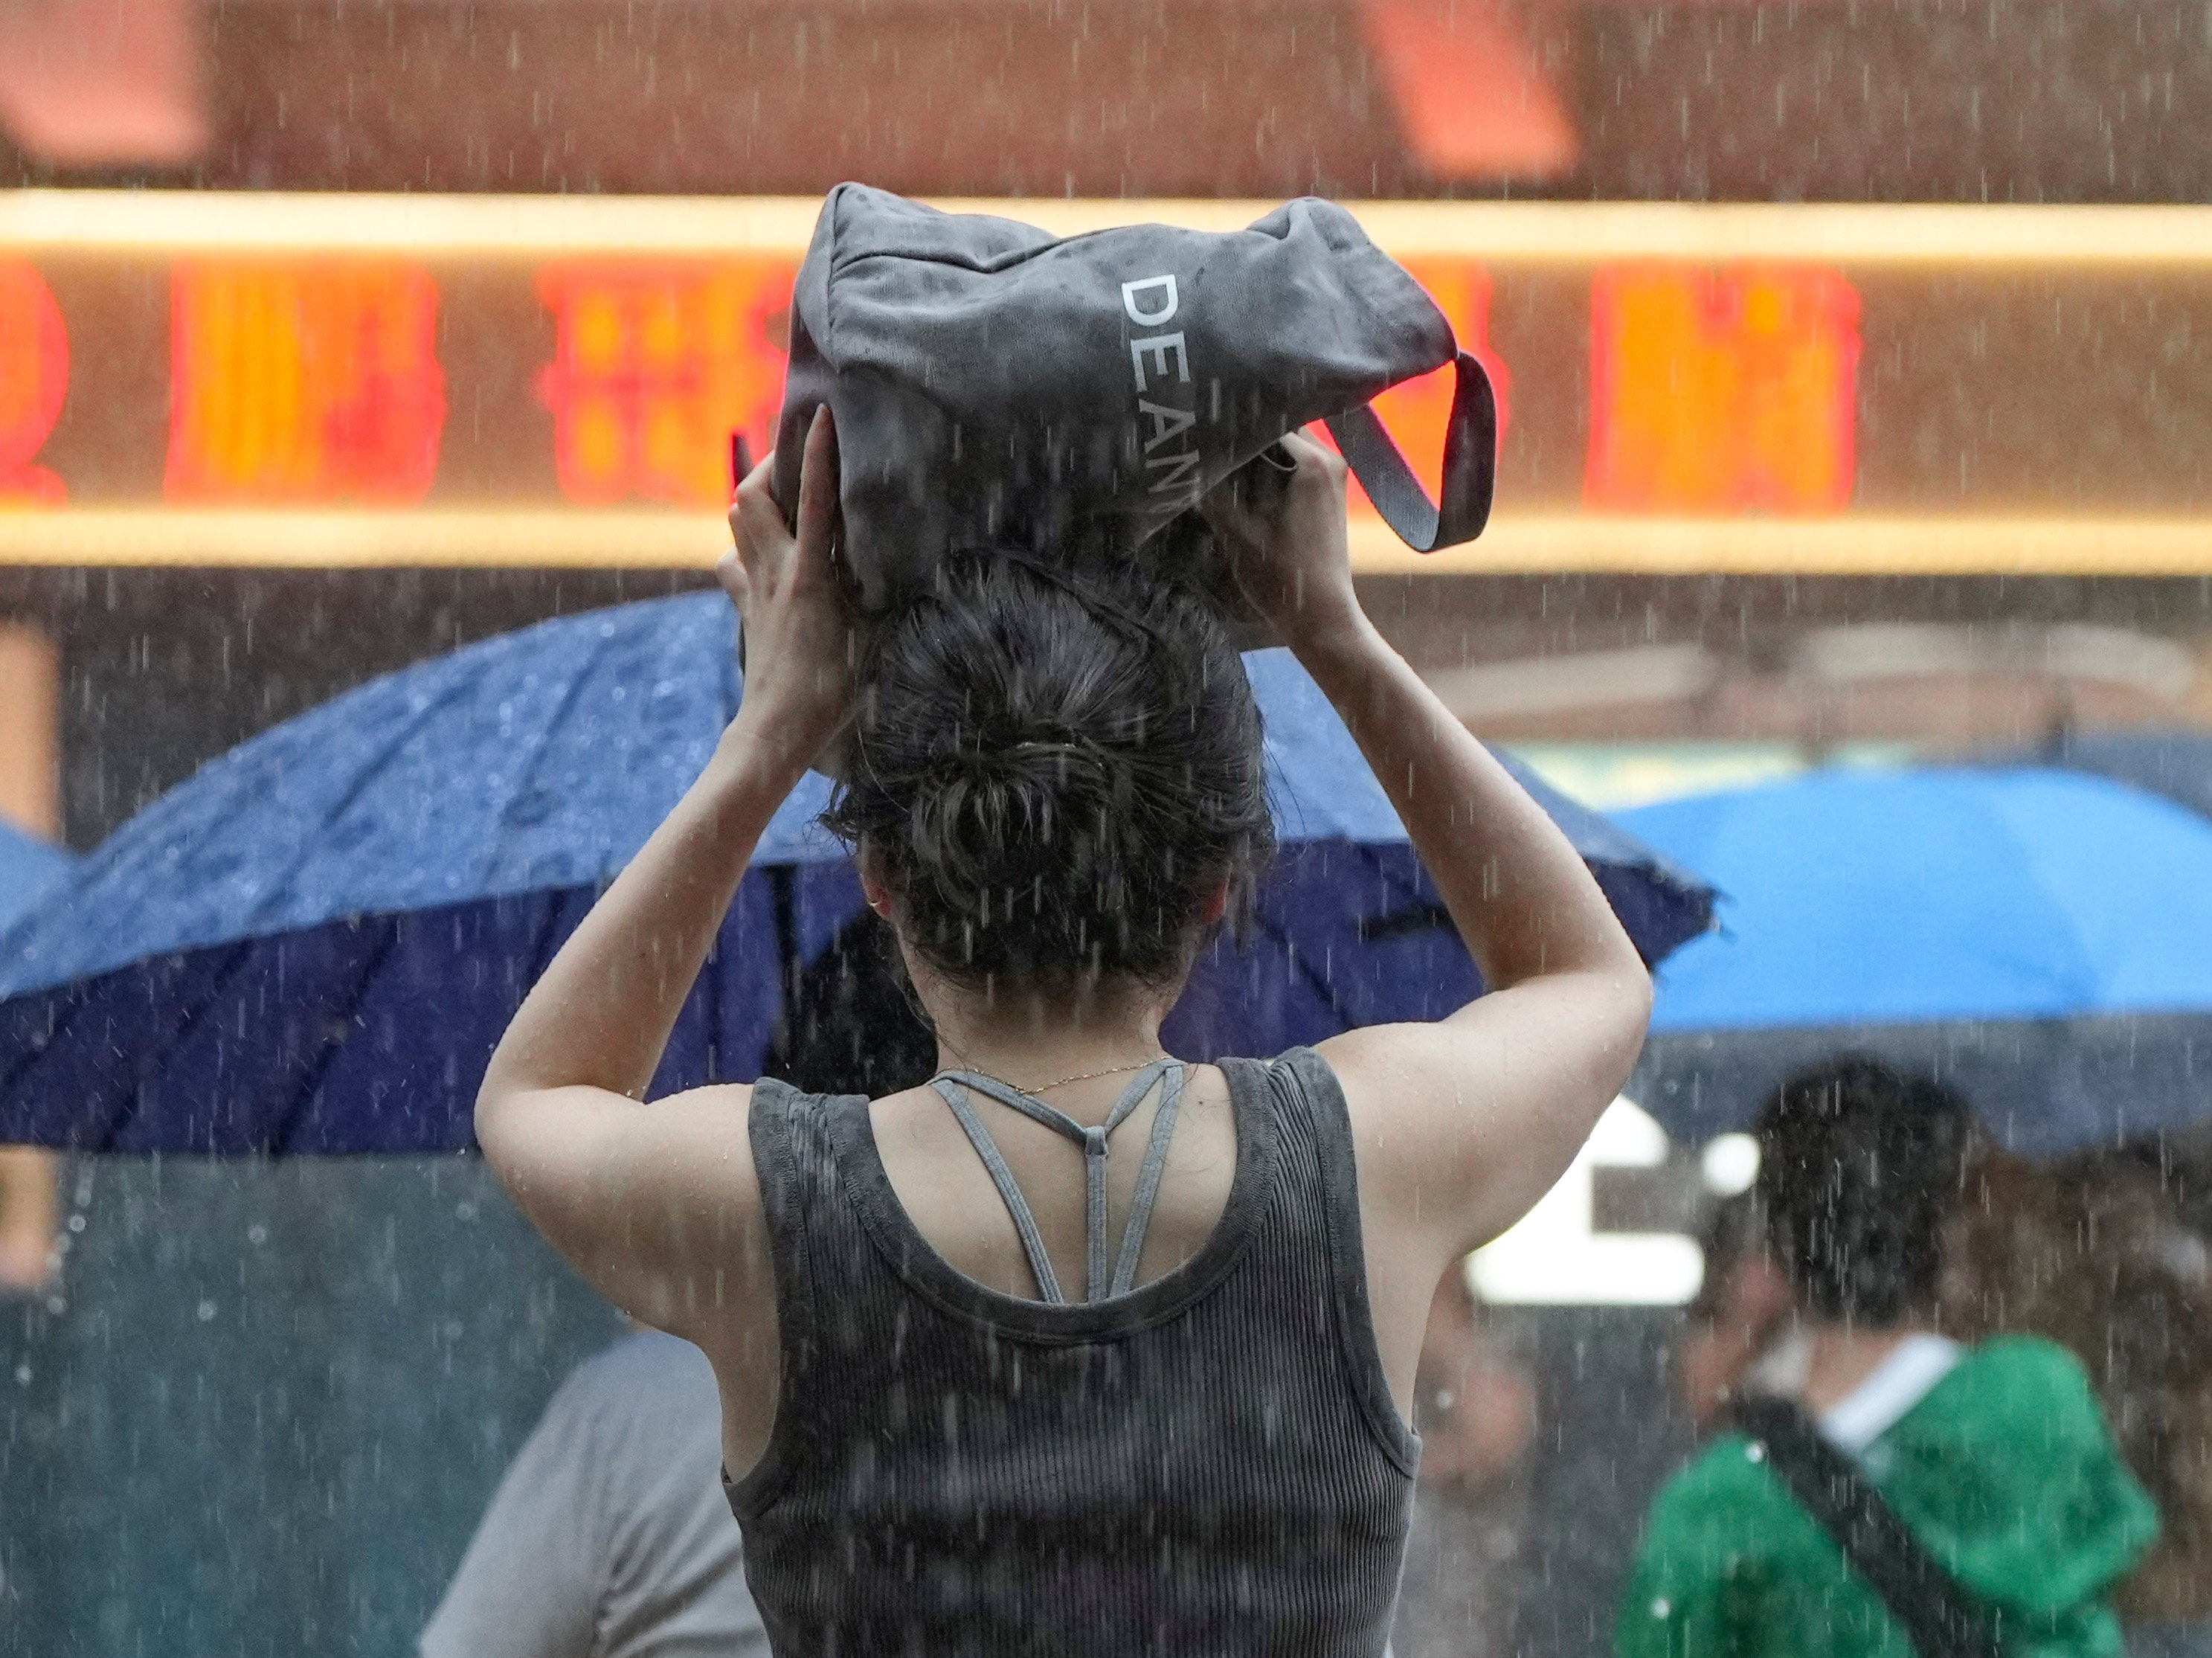 In the past few days, Hong Kong has been grappling with unstable weather, with the Observatory issuing multiple amber storm warnings due to heavy rain. Photo: Sam Tsang